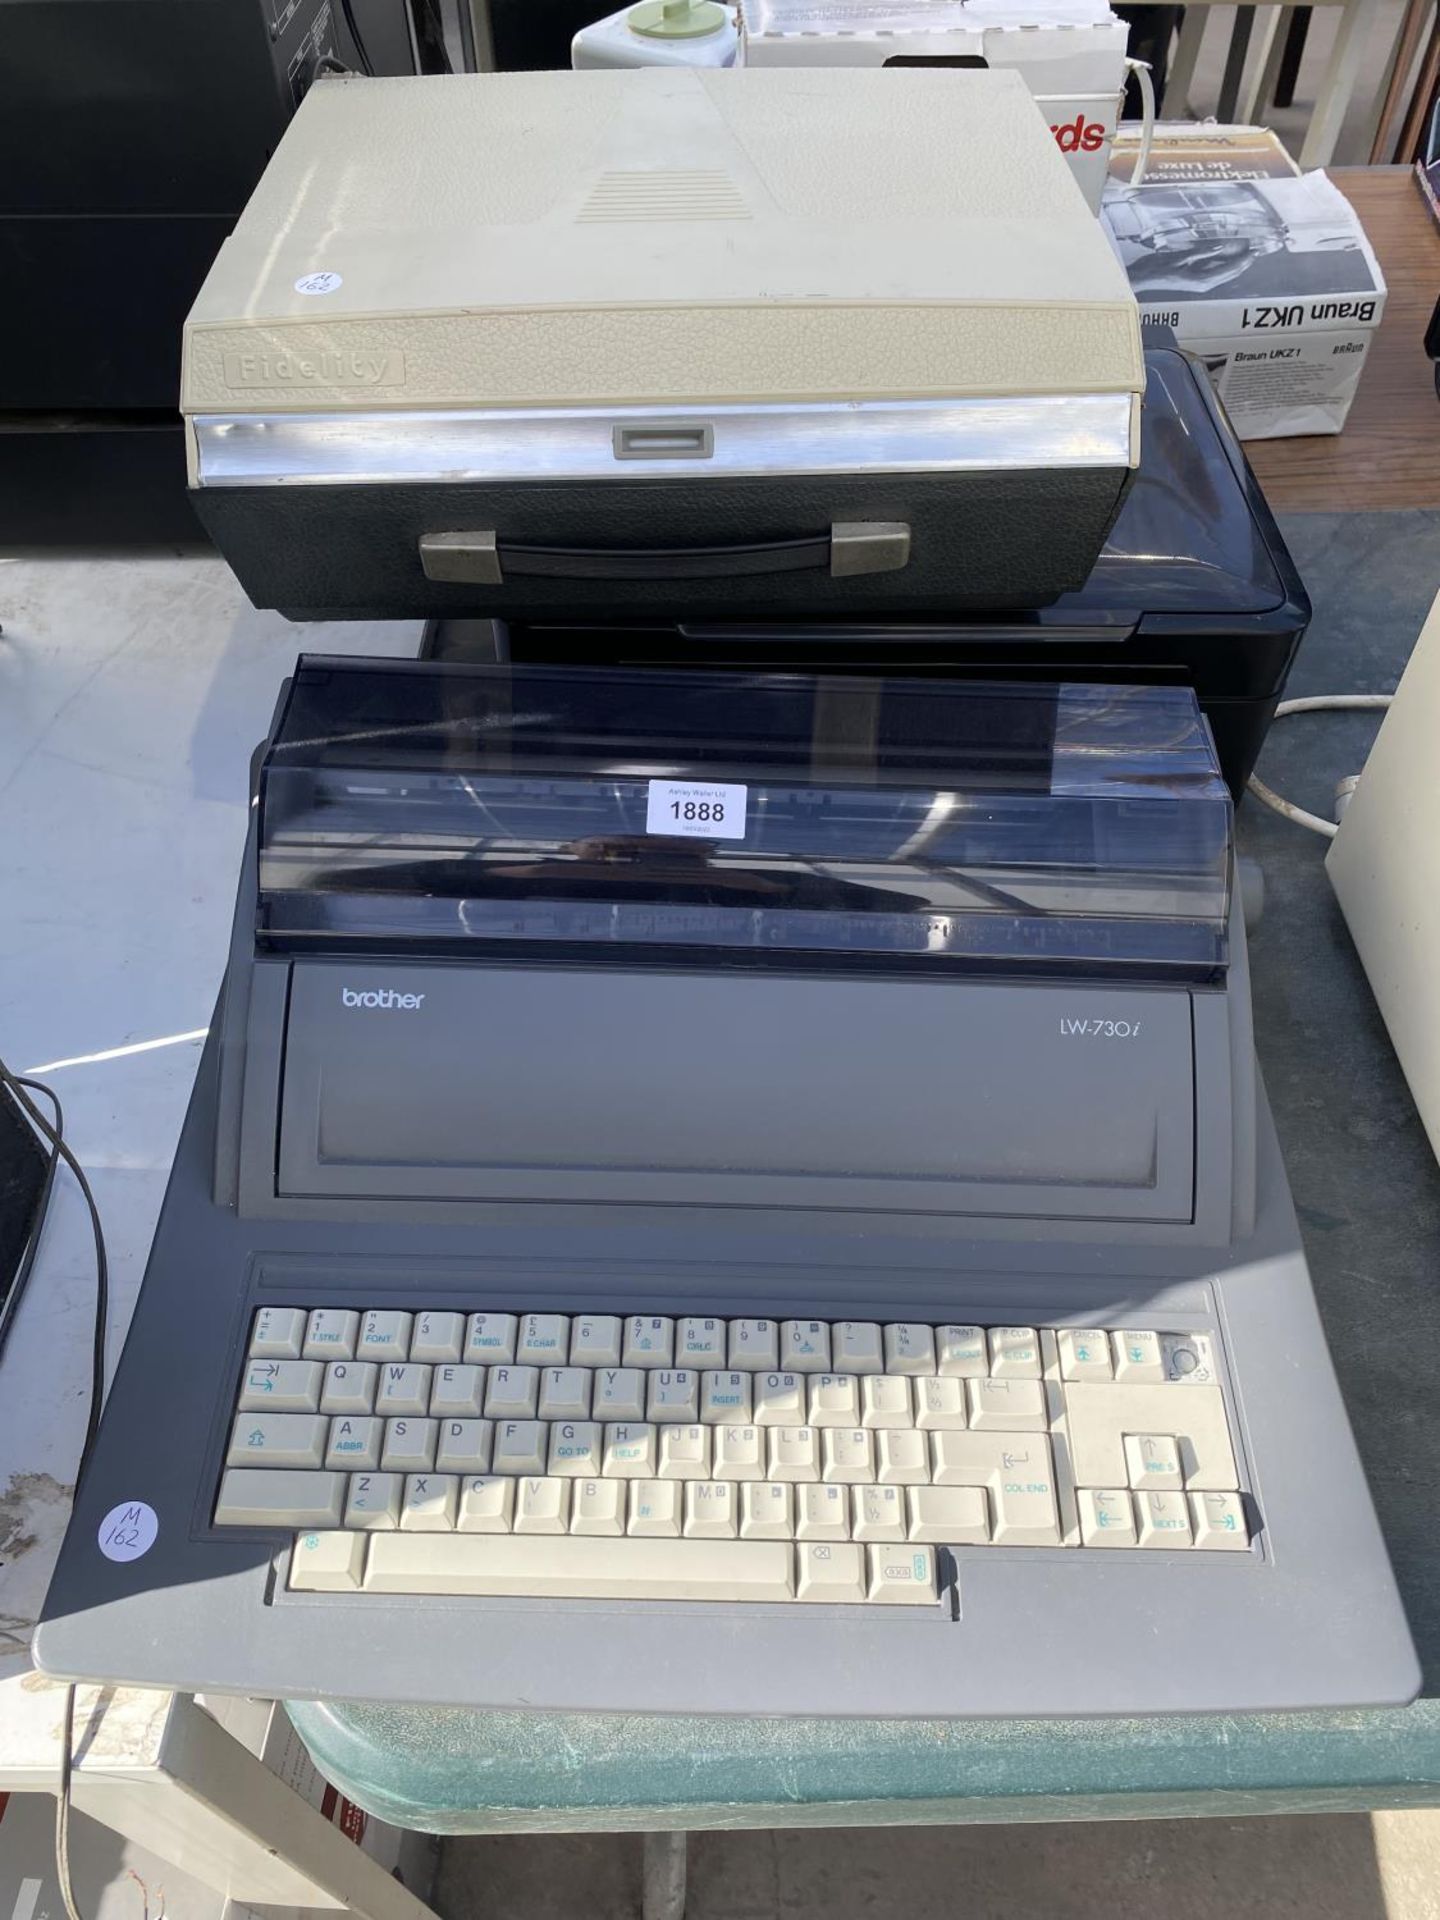 A BROTHER TYPEWRITER, A FIDELITY TAPE TO TAPE PLAYER AND AN EPSON PRINTER